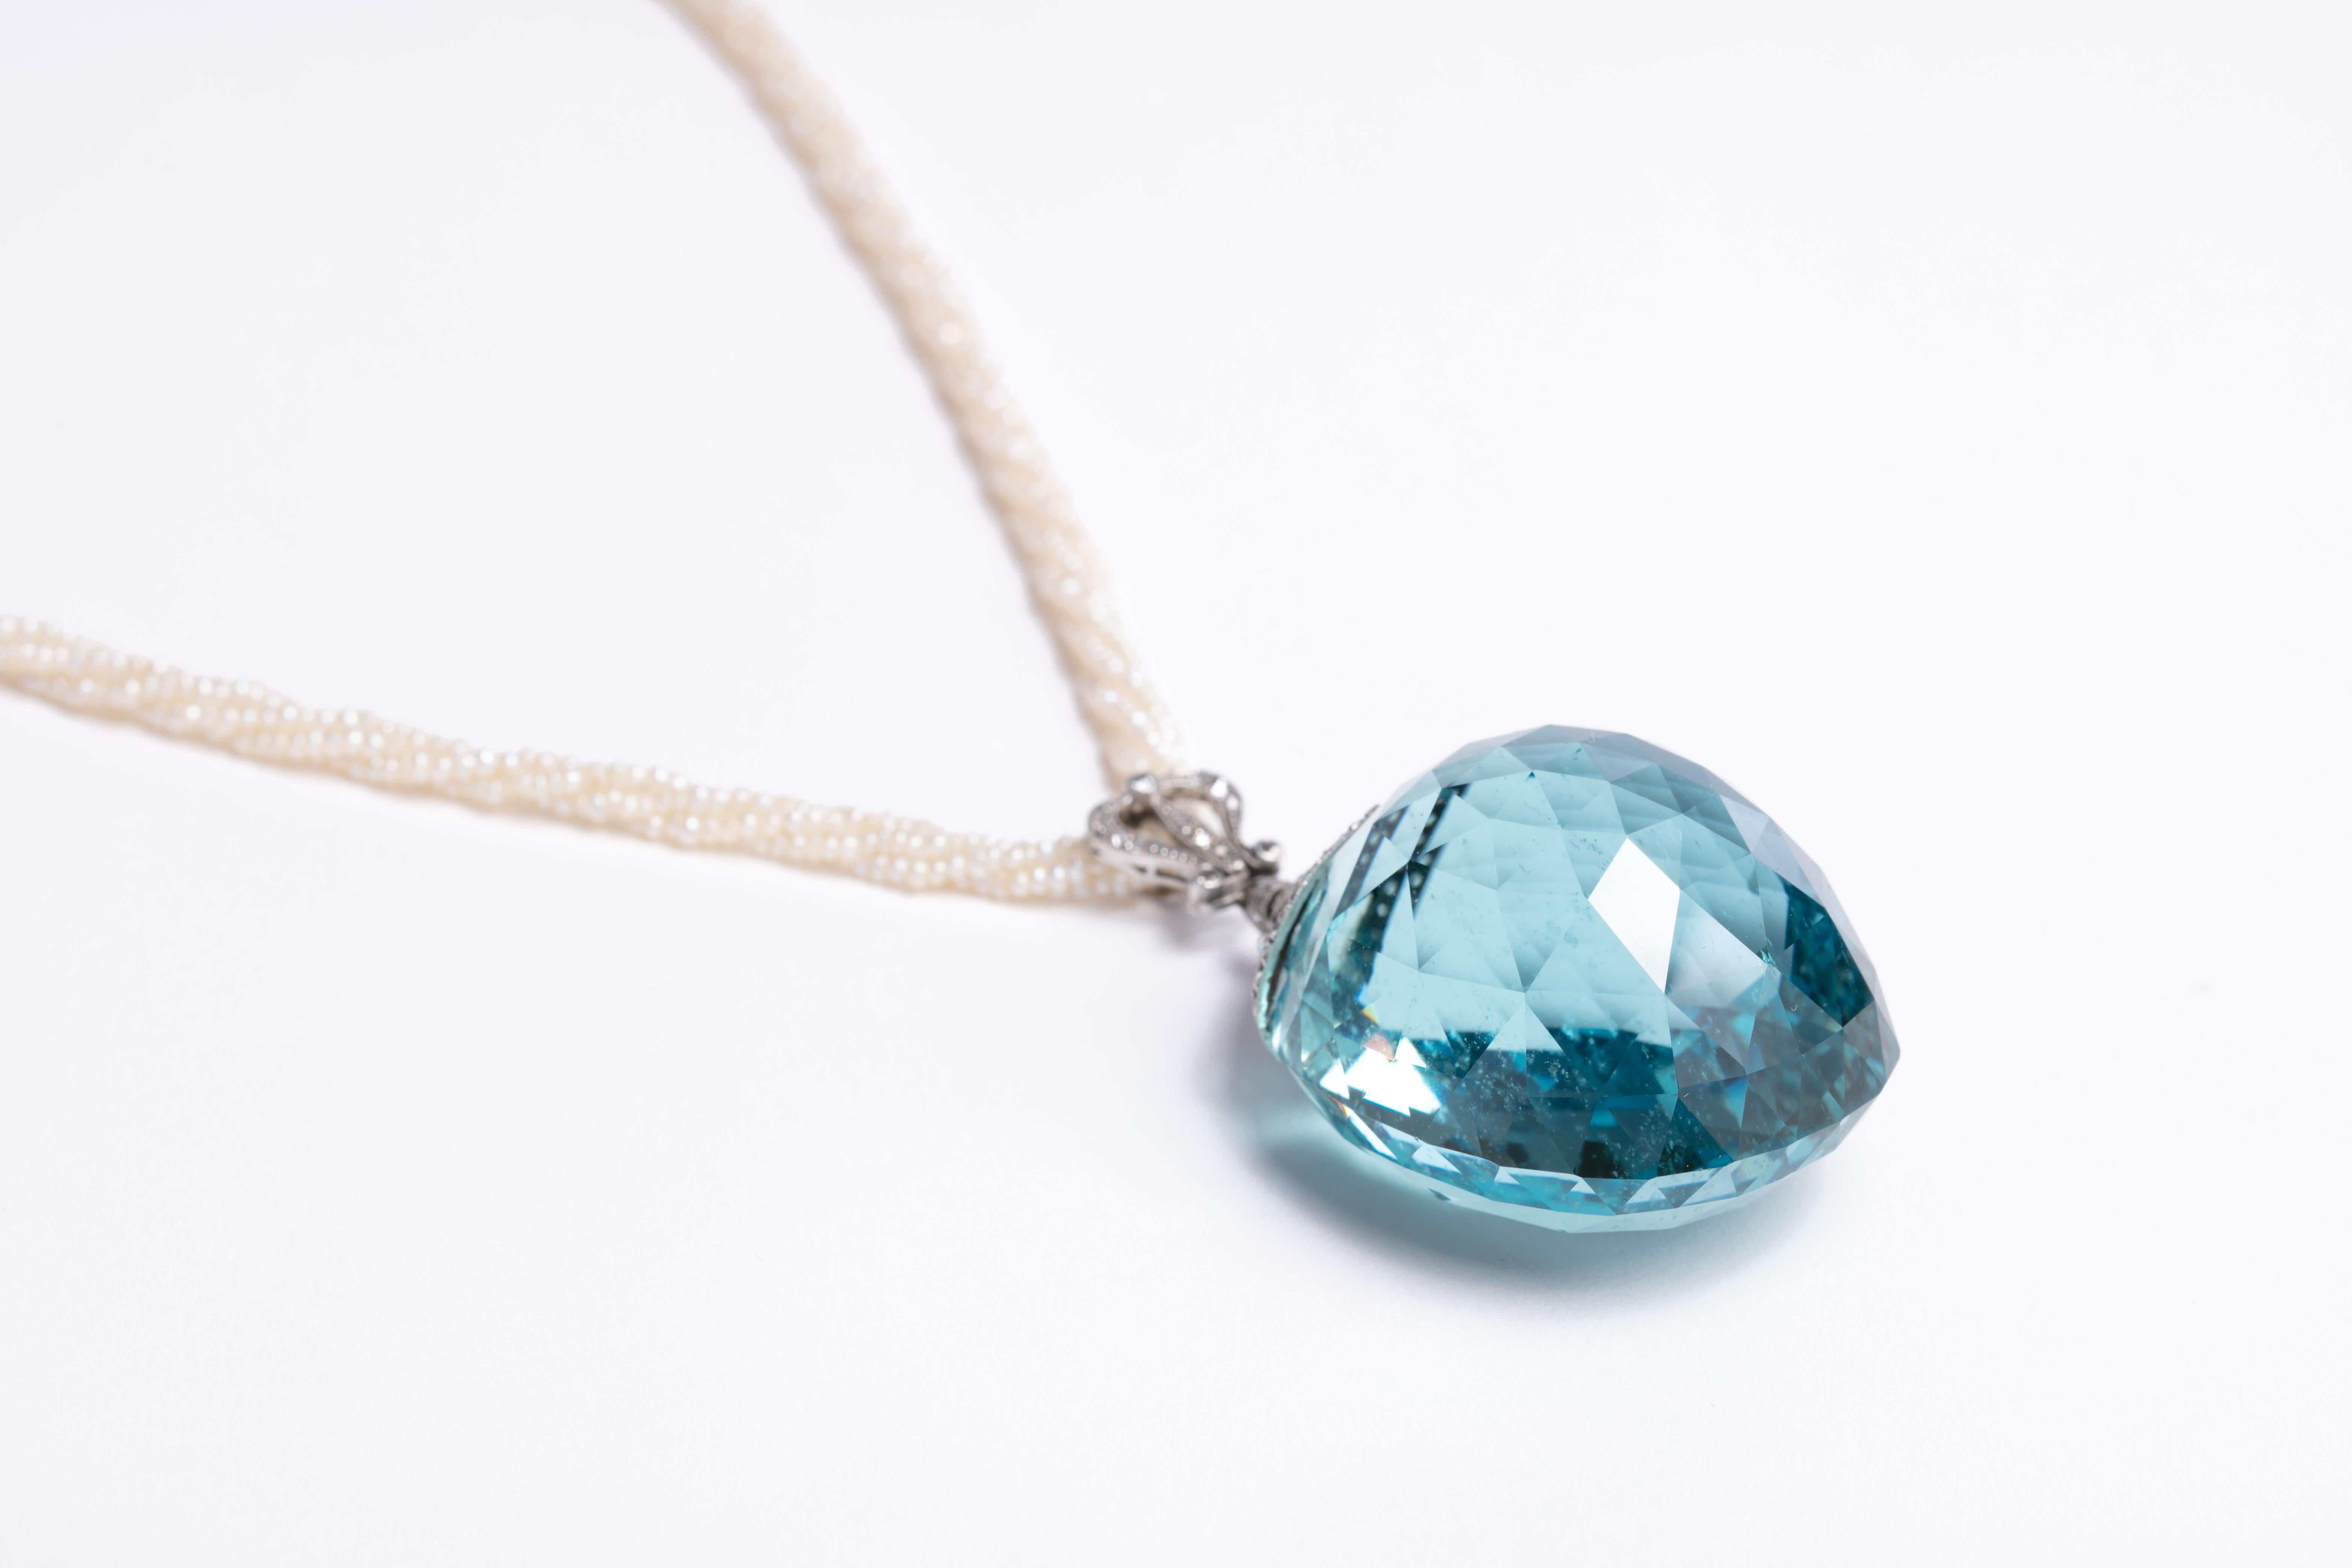 Women's 200 Carat Aquamarine Pendant with Antique Seed Pearl Necklace